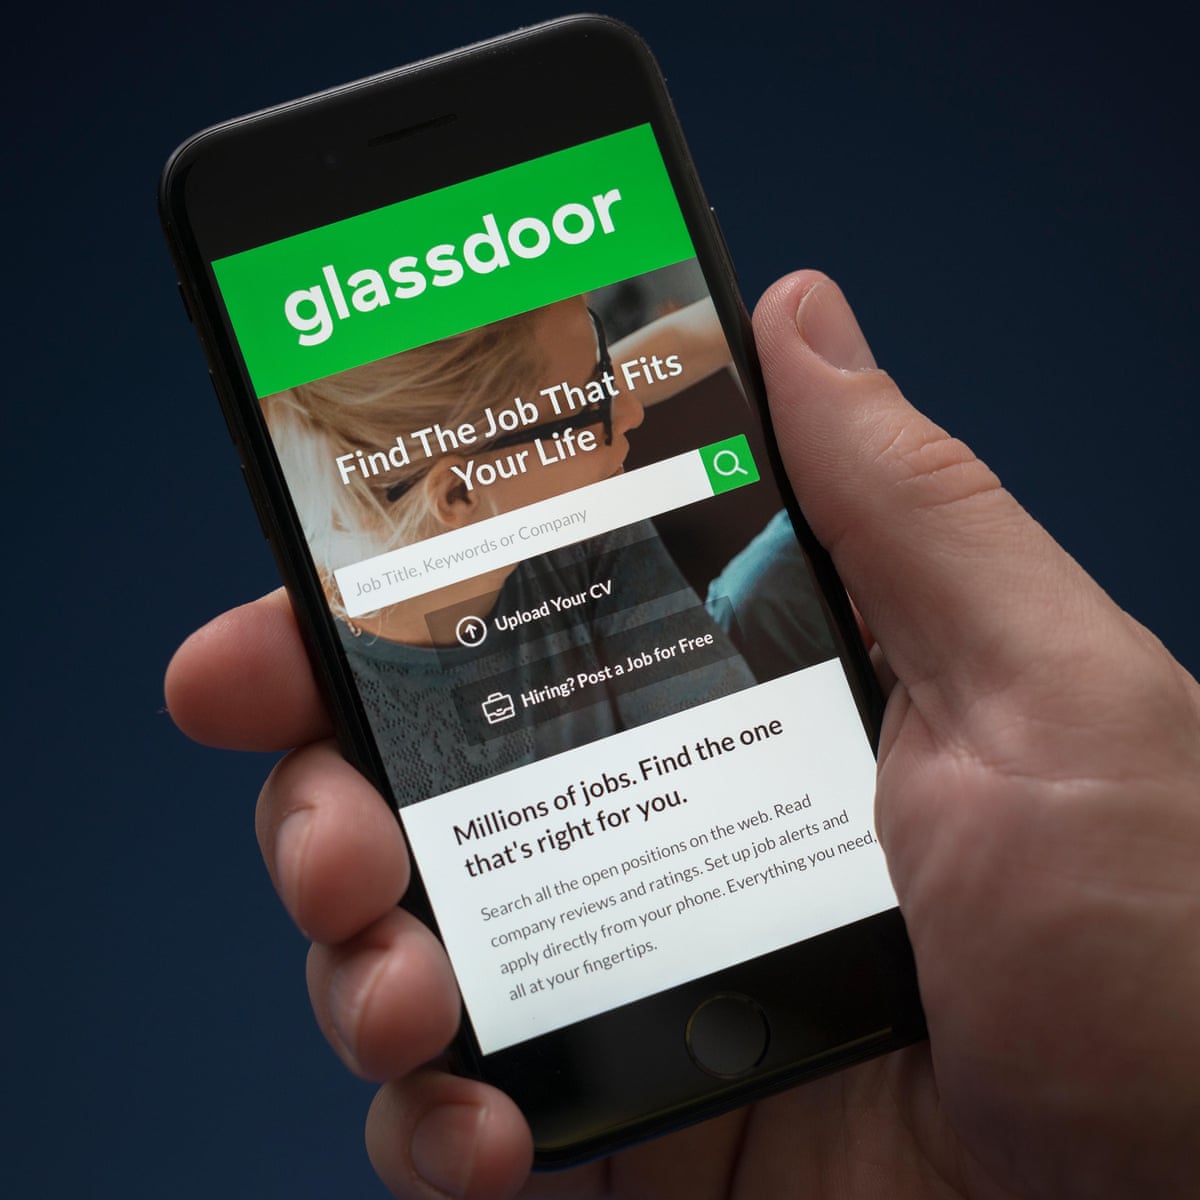 Glassdoor ordered to reveal identity of negative reviewers to New Zealand  toymaker | New Zealand | The Guardian